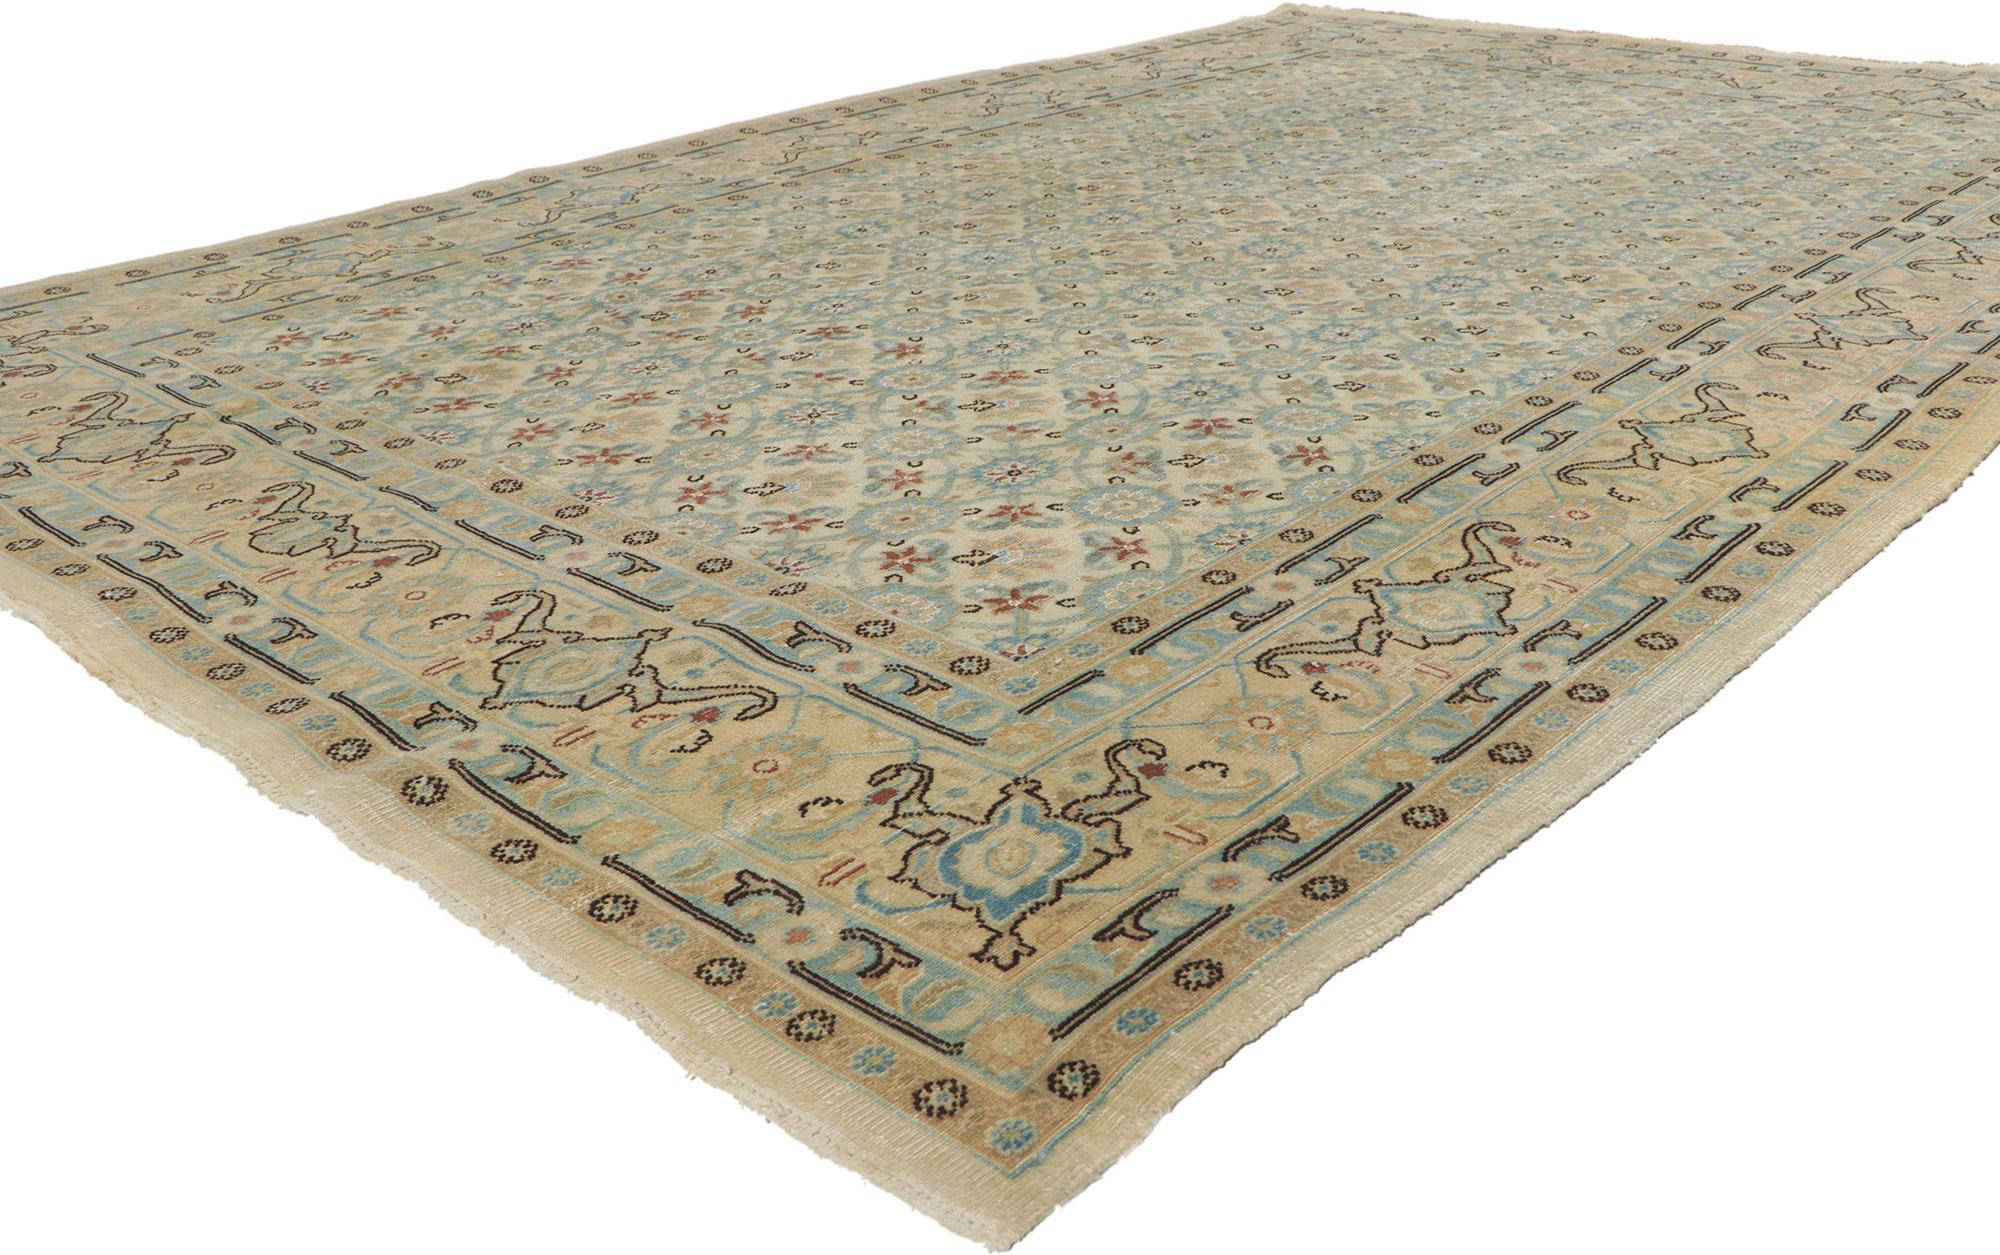 51543, antique Persian Mashhad rug. This hand-knotted wool antique Persian Mashhad rug features an all-over Herati pattern surrounded by a complementary Herati and rosette border in soft, light colors. Cleverly composed with contrasting outlines,